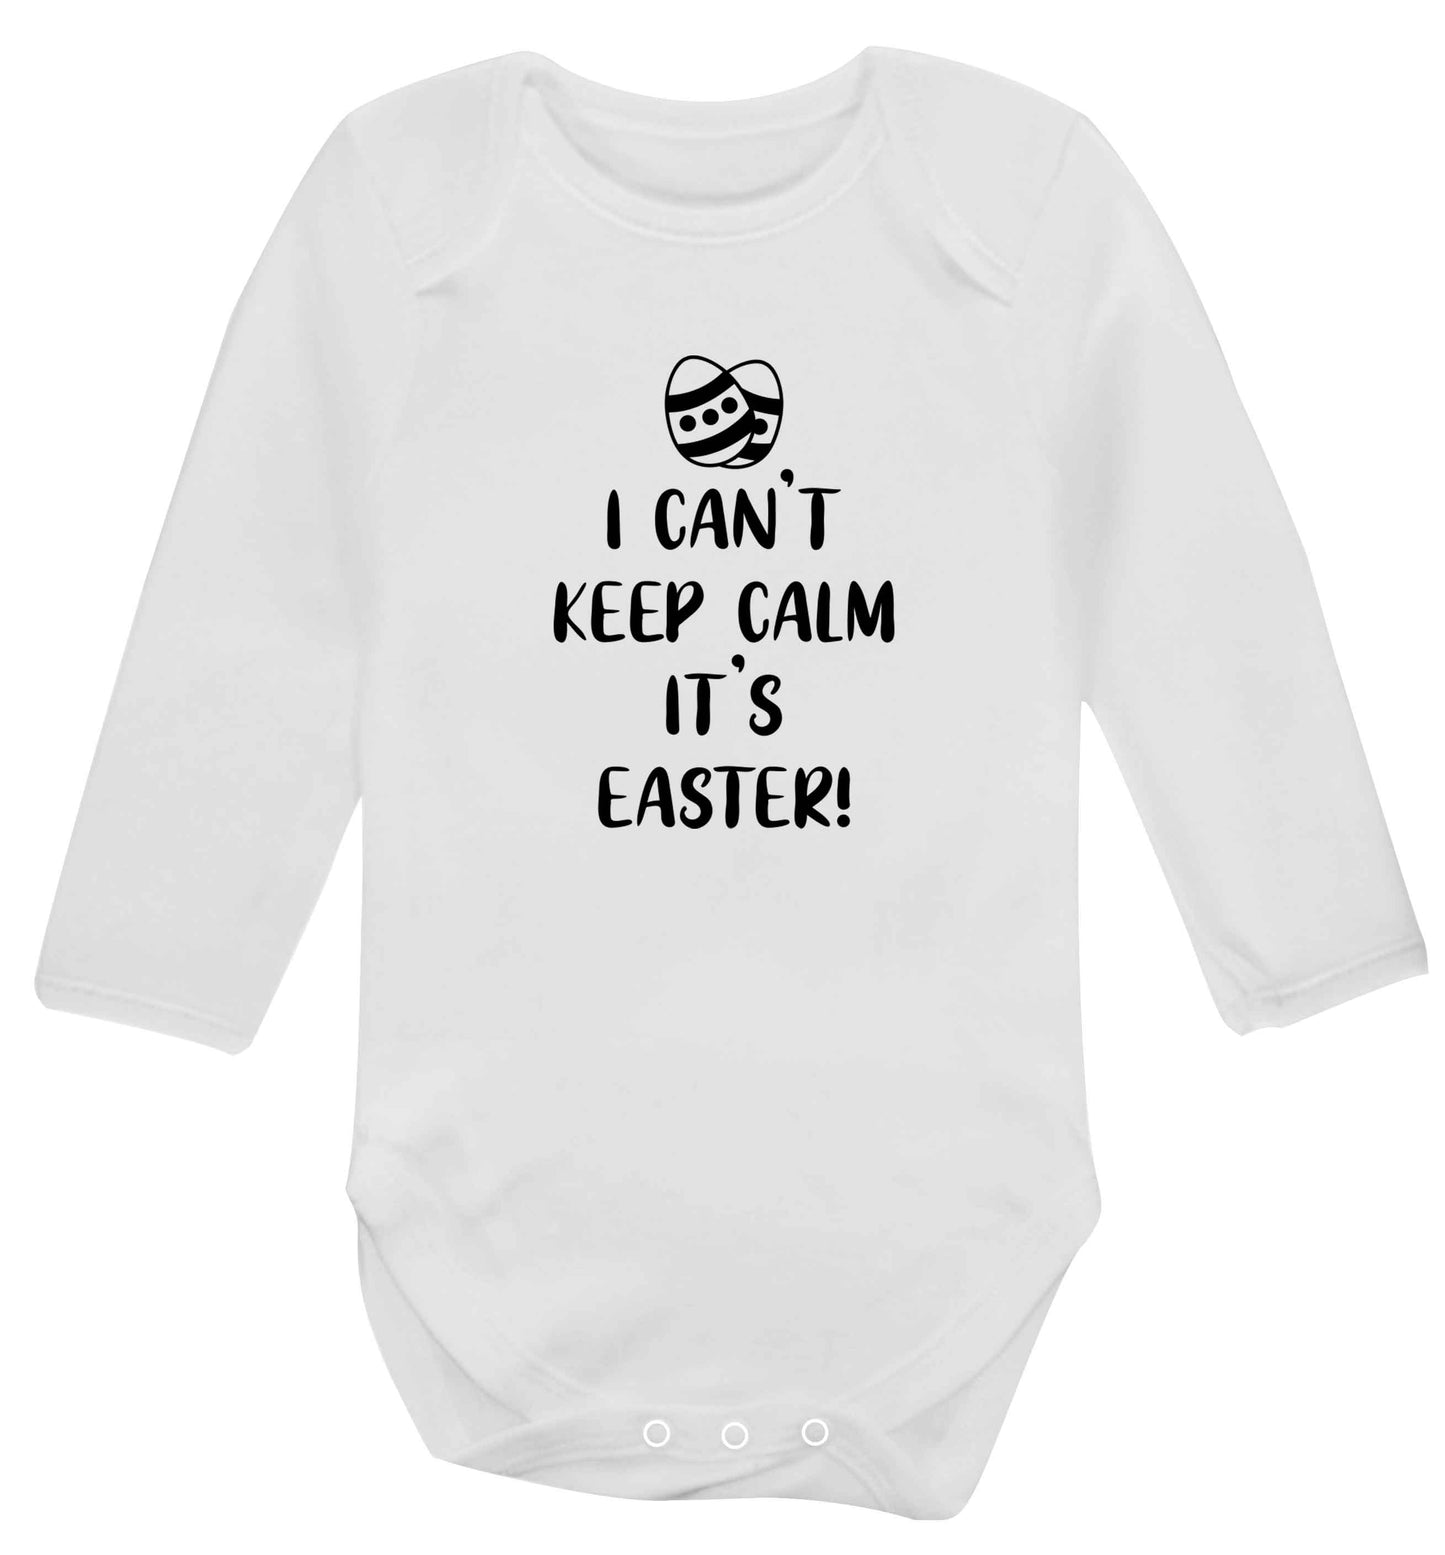 I can't keep calm it's Easter baby vest long sleeved white 6-12 months